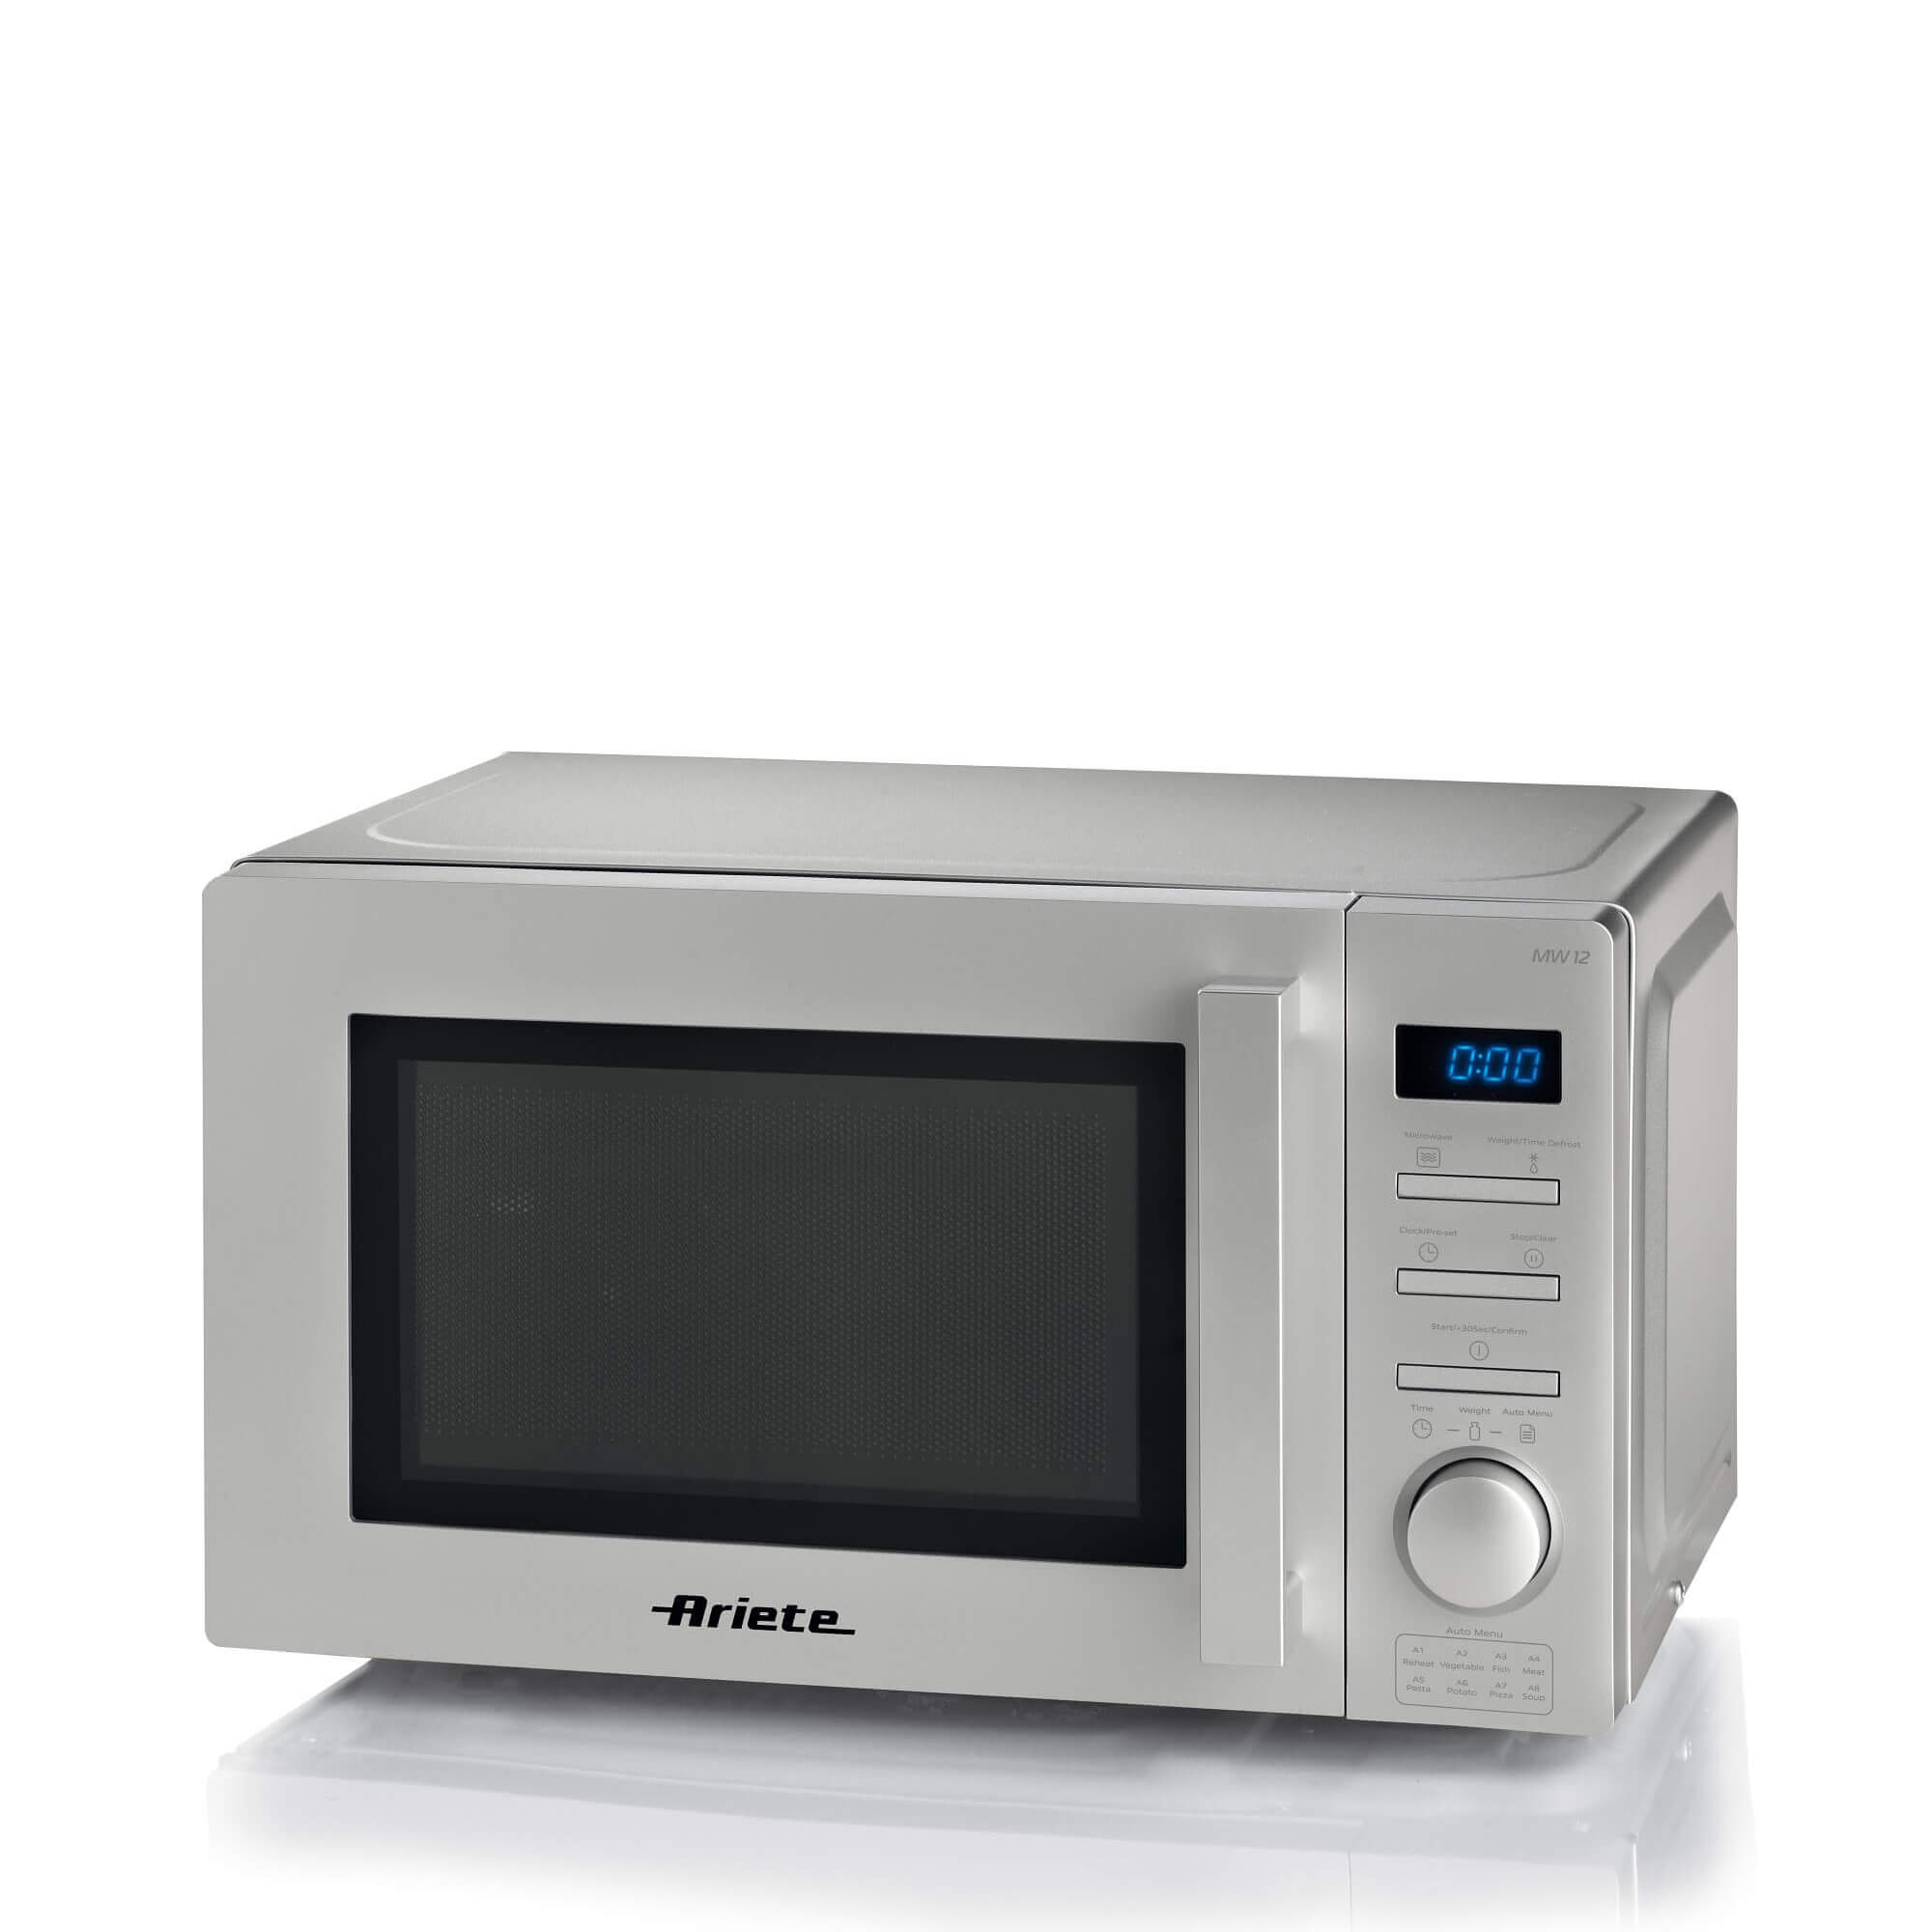 Digital microwave oven with 8 cooking modes